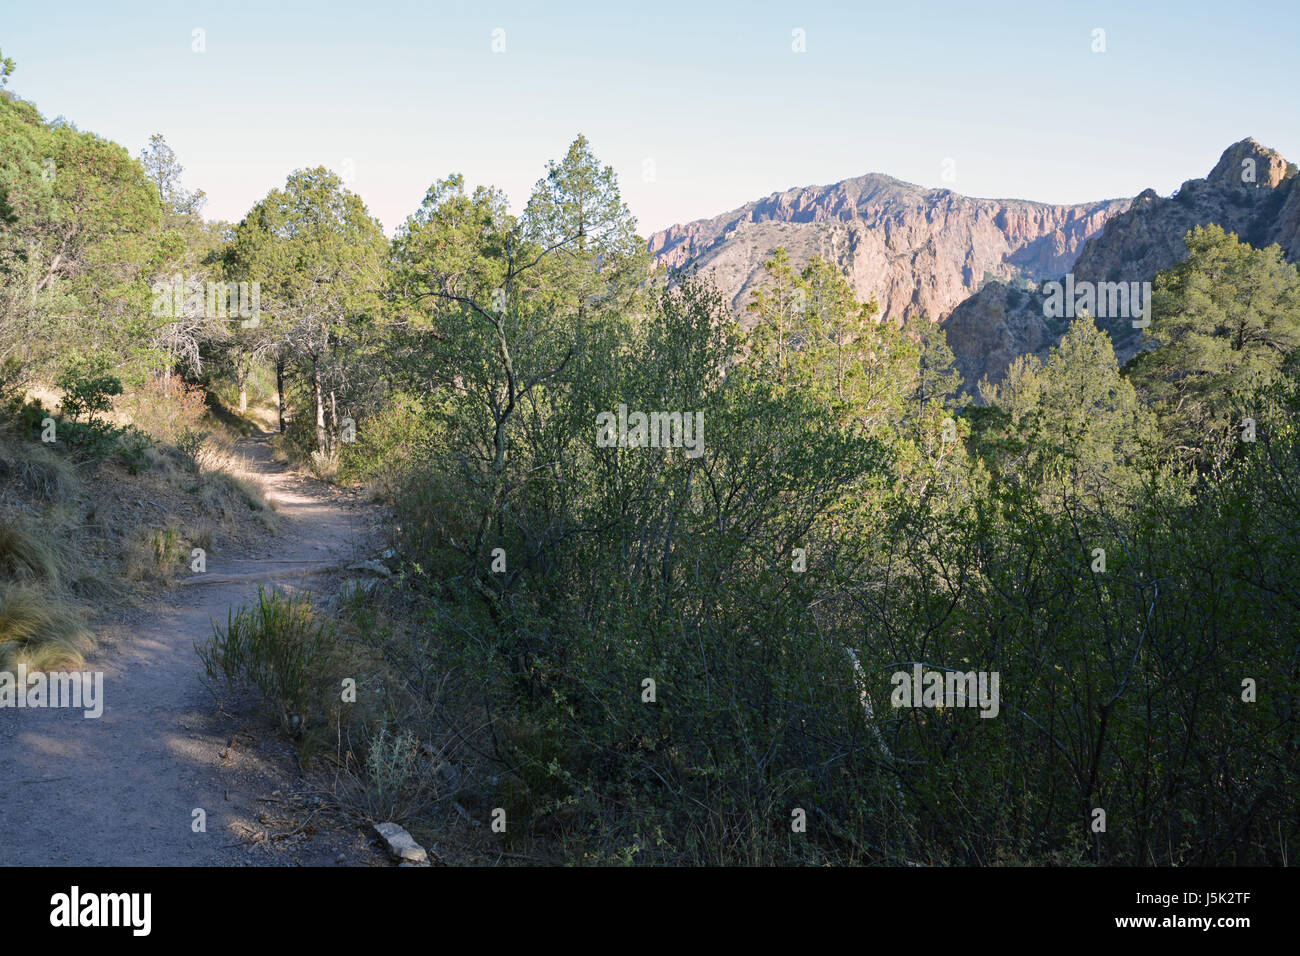 The lower portion of the Lost Mine Trail at Big Bend National Park winds through Pinyon Pine trees Stock Photo